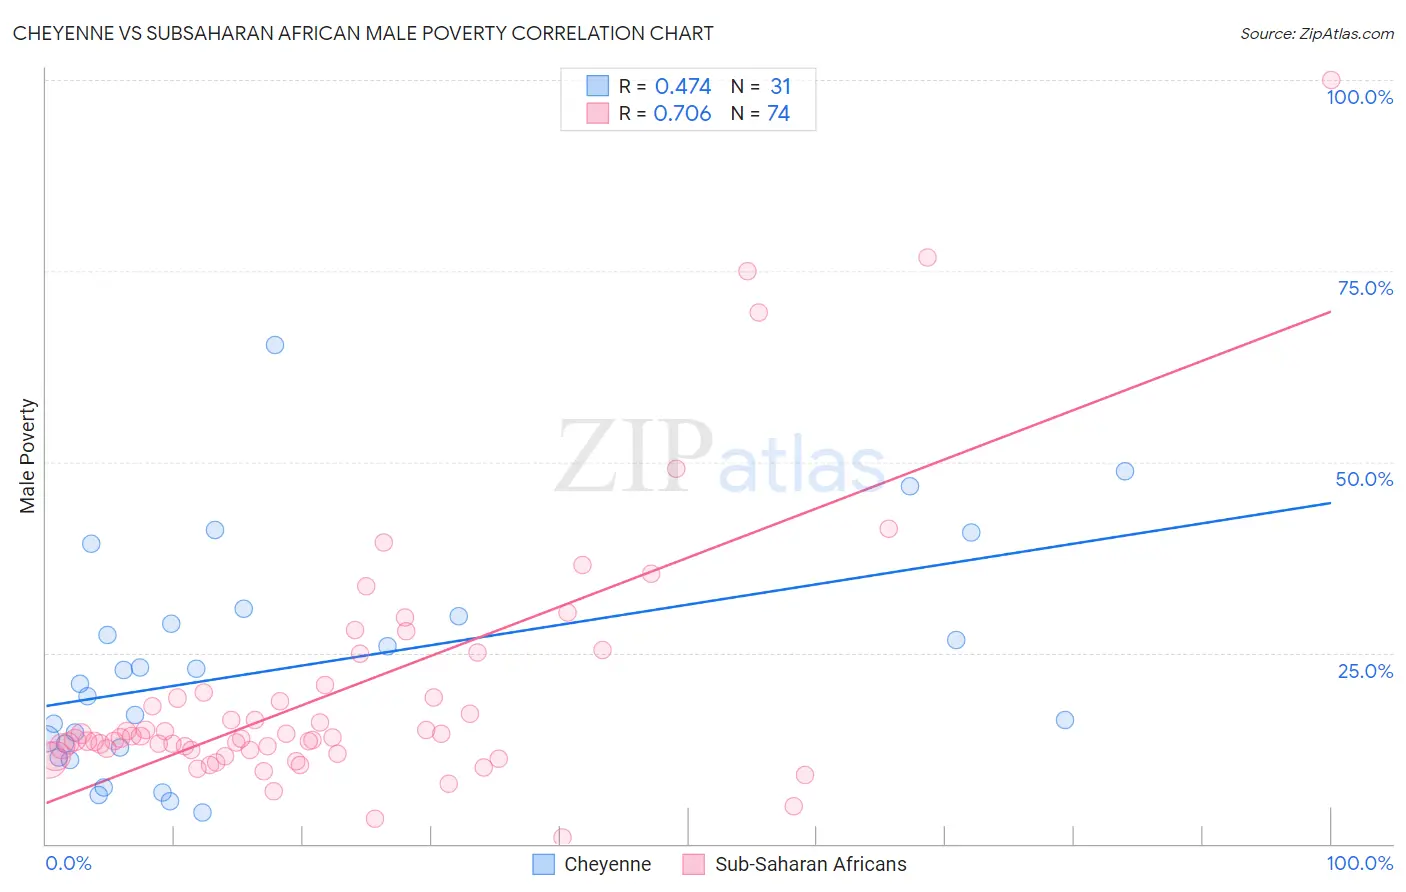 Cheyenne vs Subsaharan African Male Poverty